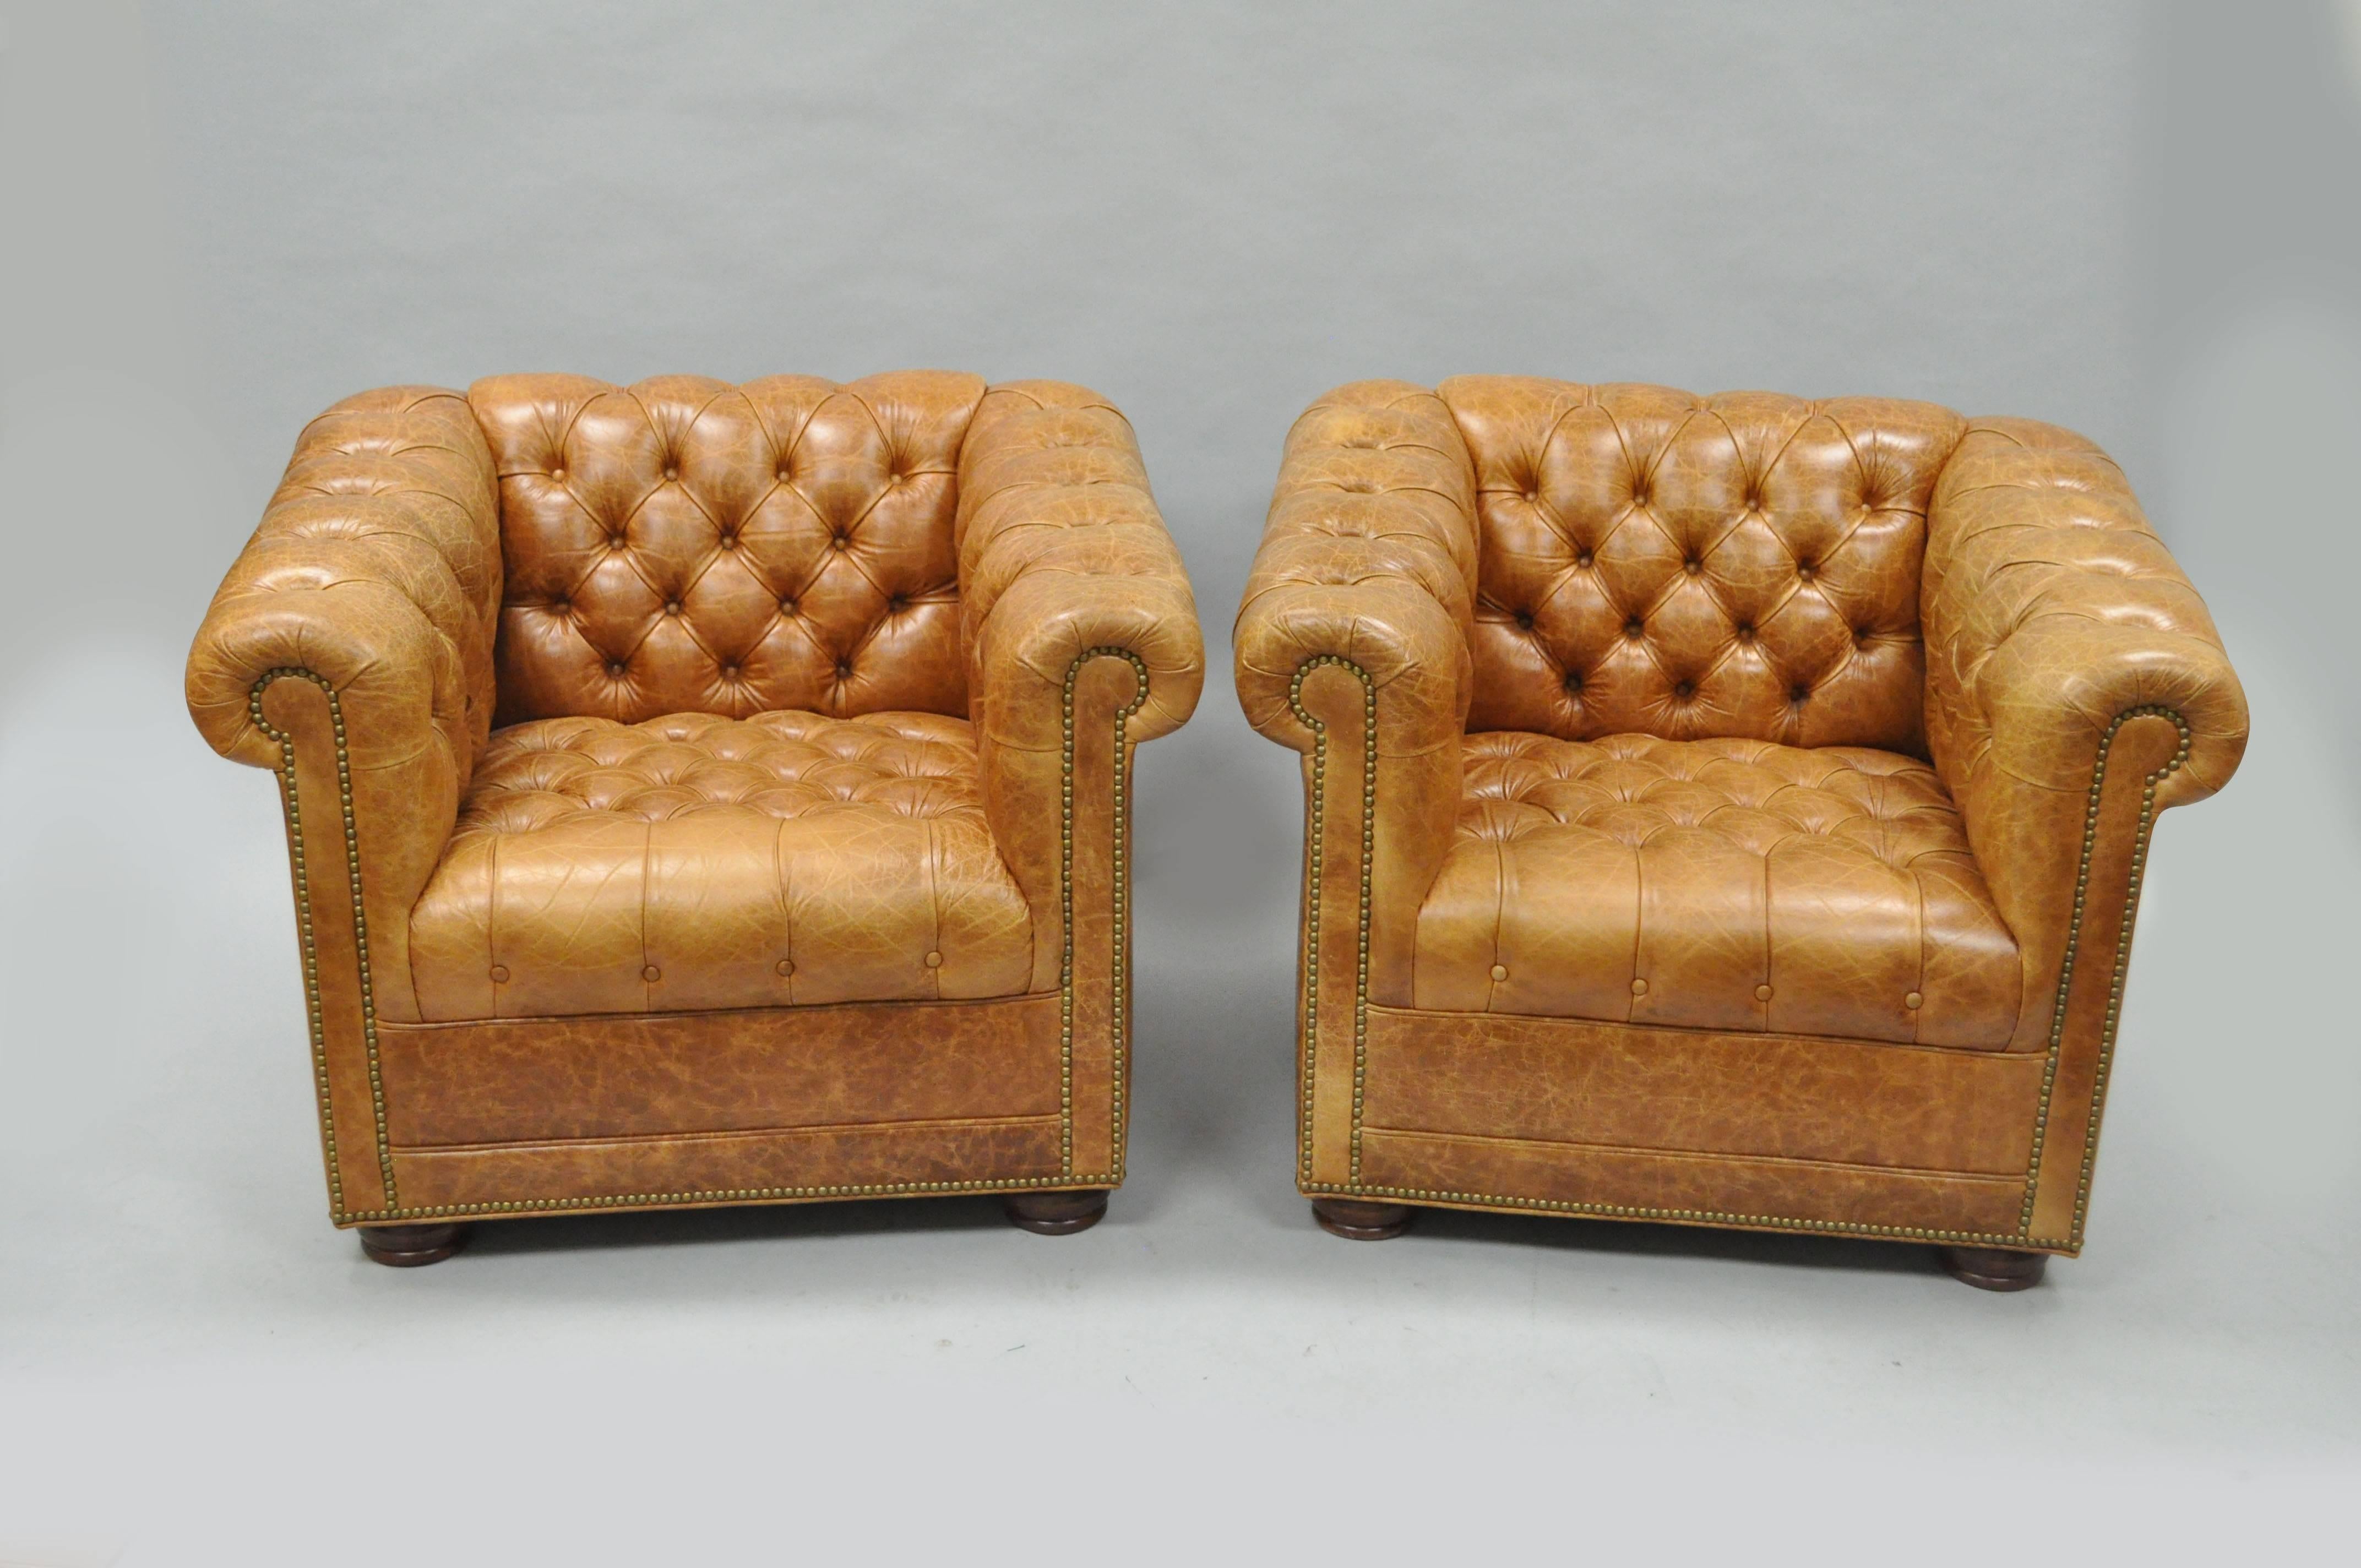 Quality pair of 21st century button tufted Chesterfield style distressed cognac leather churchill lounge or club chairs by Leathercraft. Chairs feature deep button tufted distressed leather upholstery, nailhead trim, solid maple wood bun feet on the